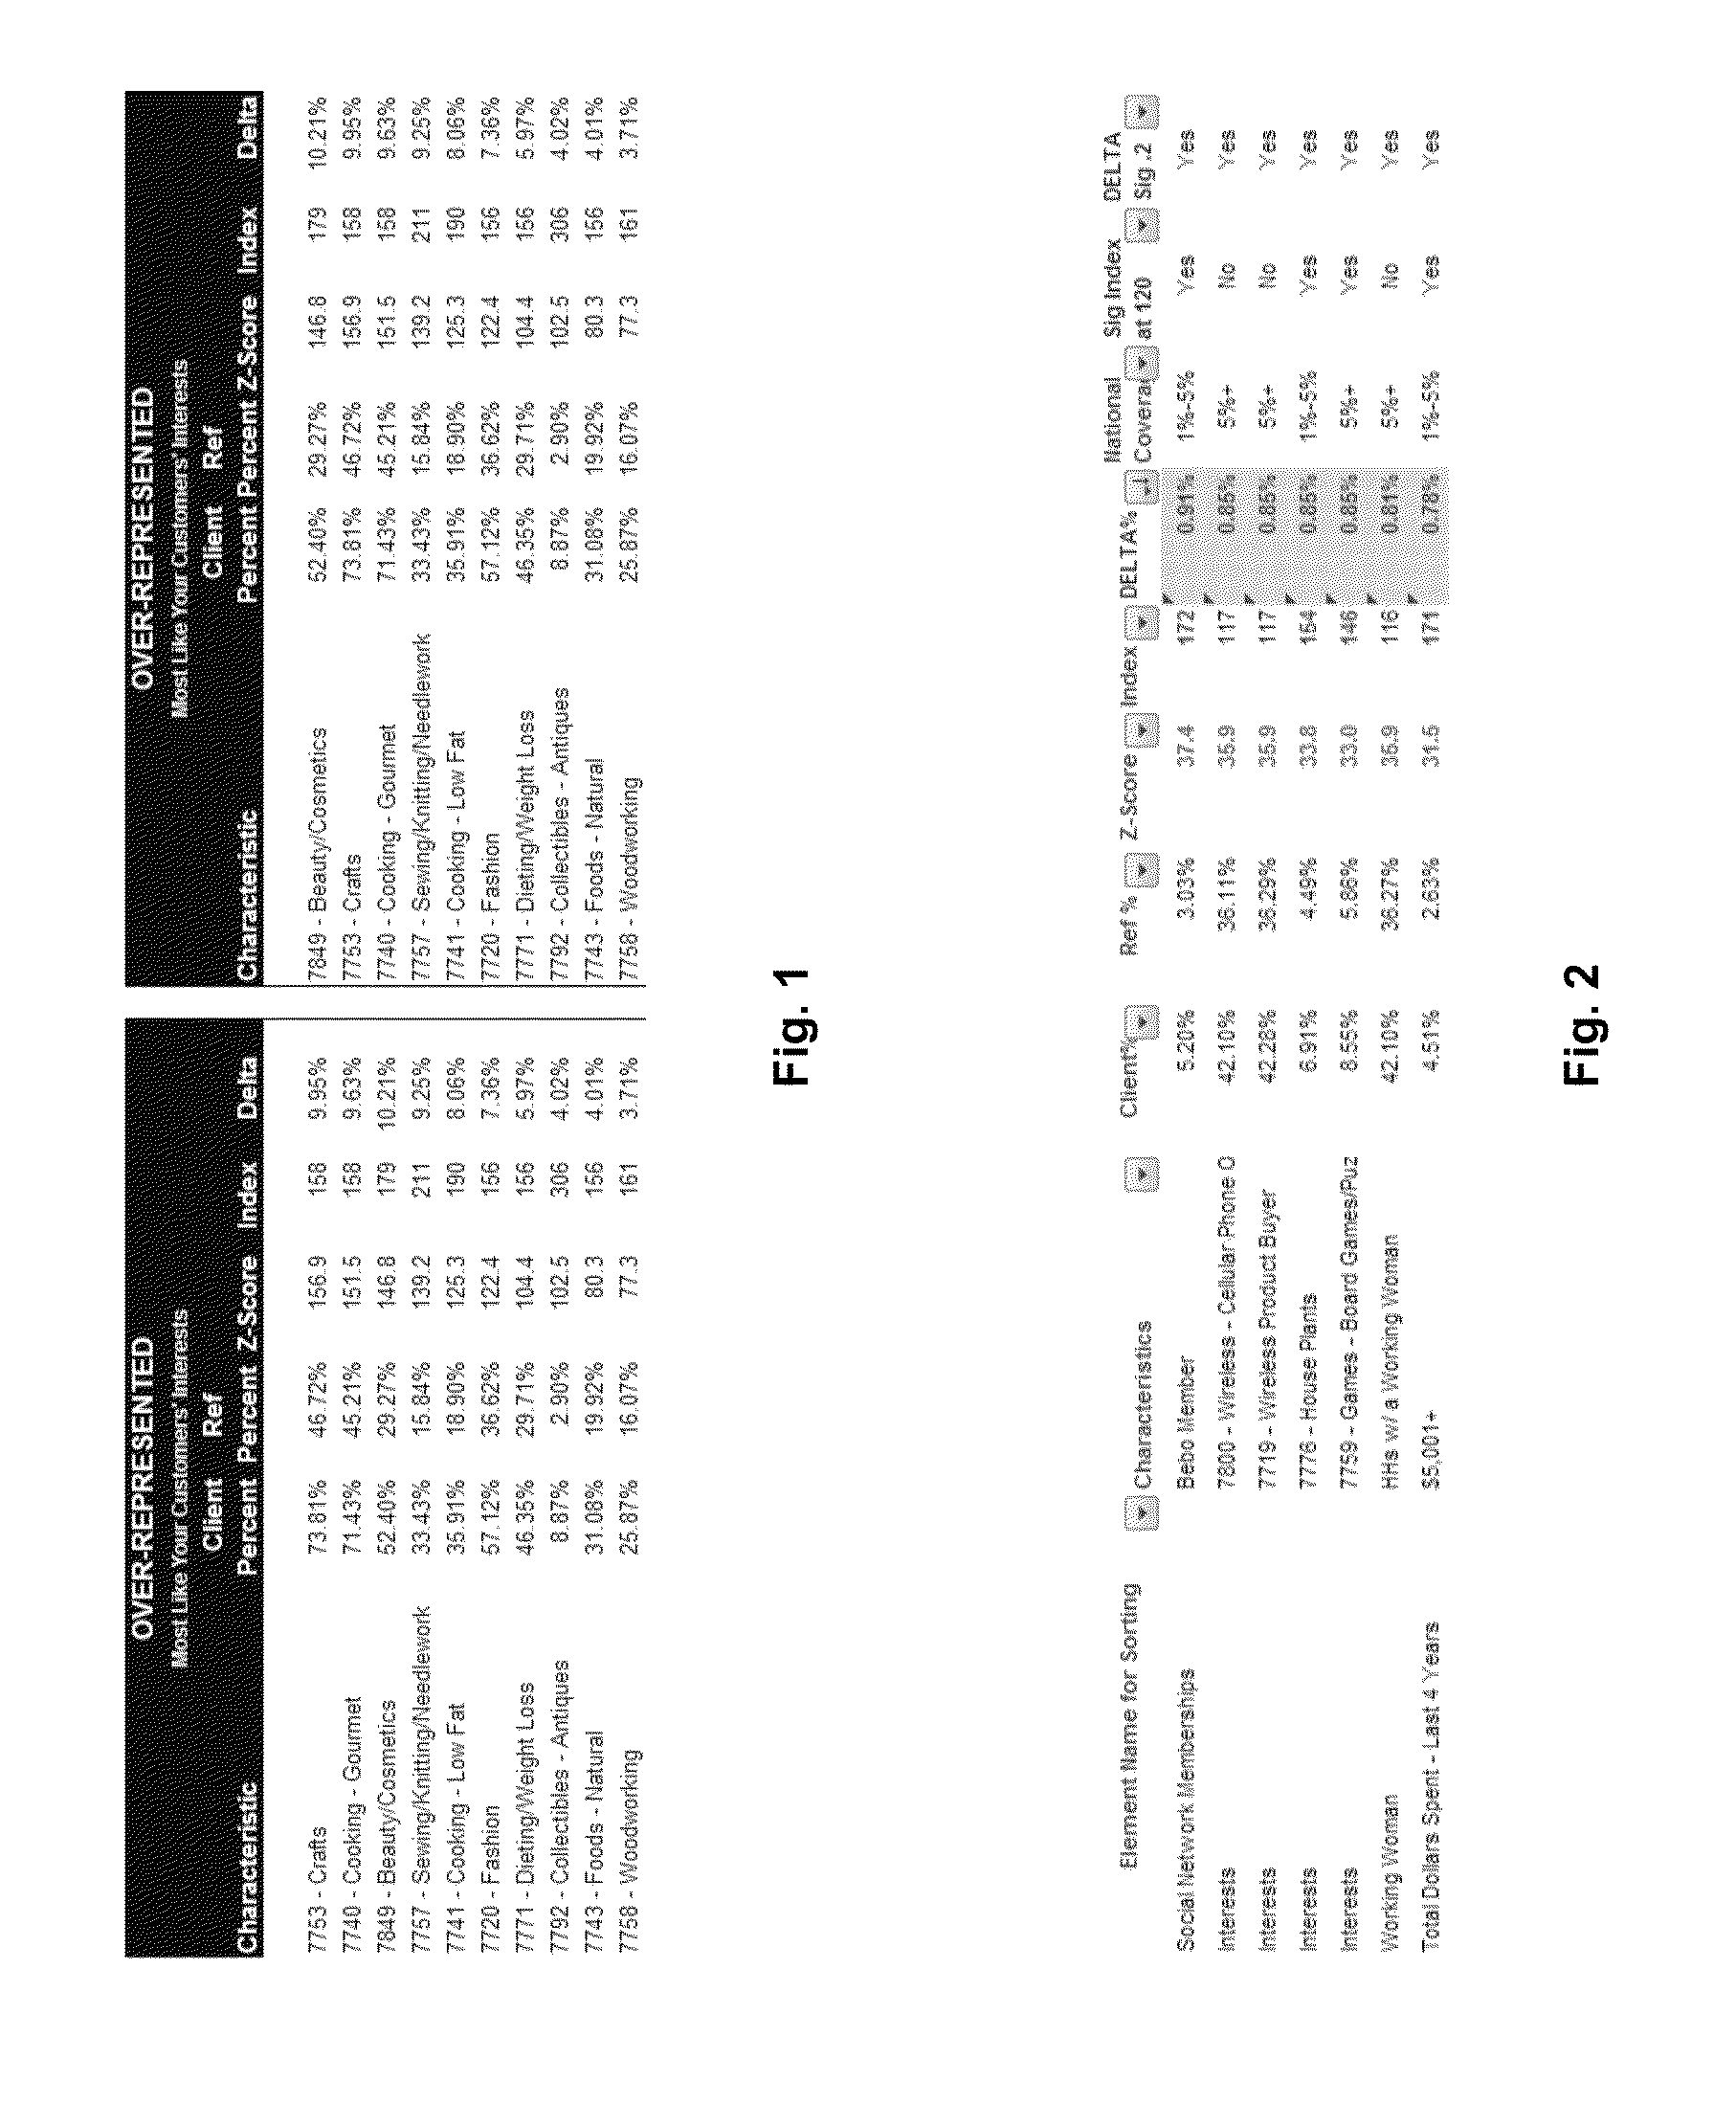 System and Method for Representing Change Values